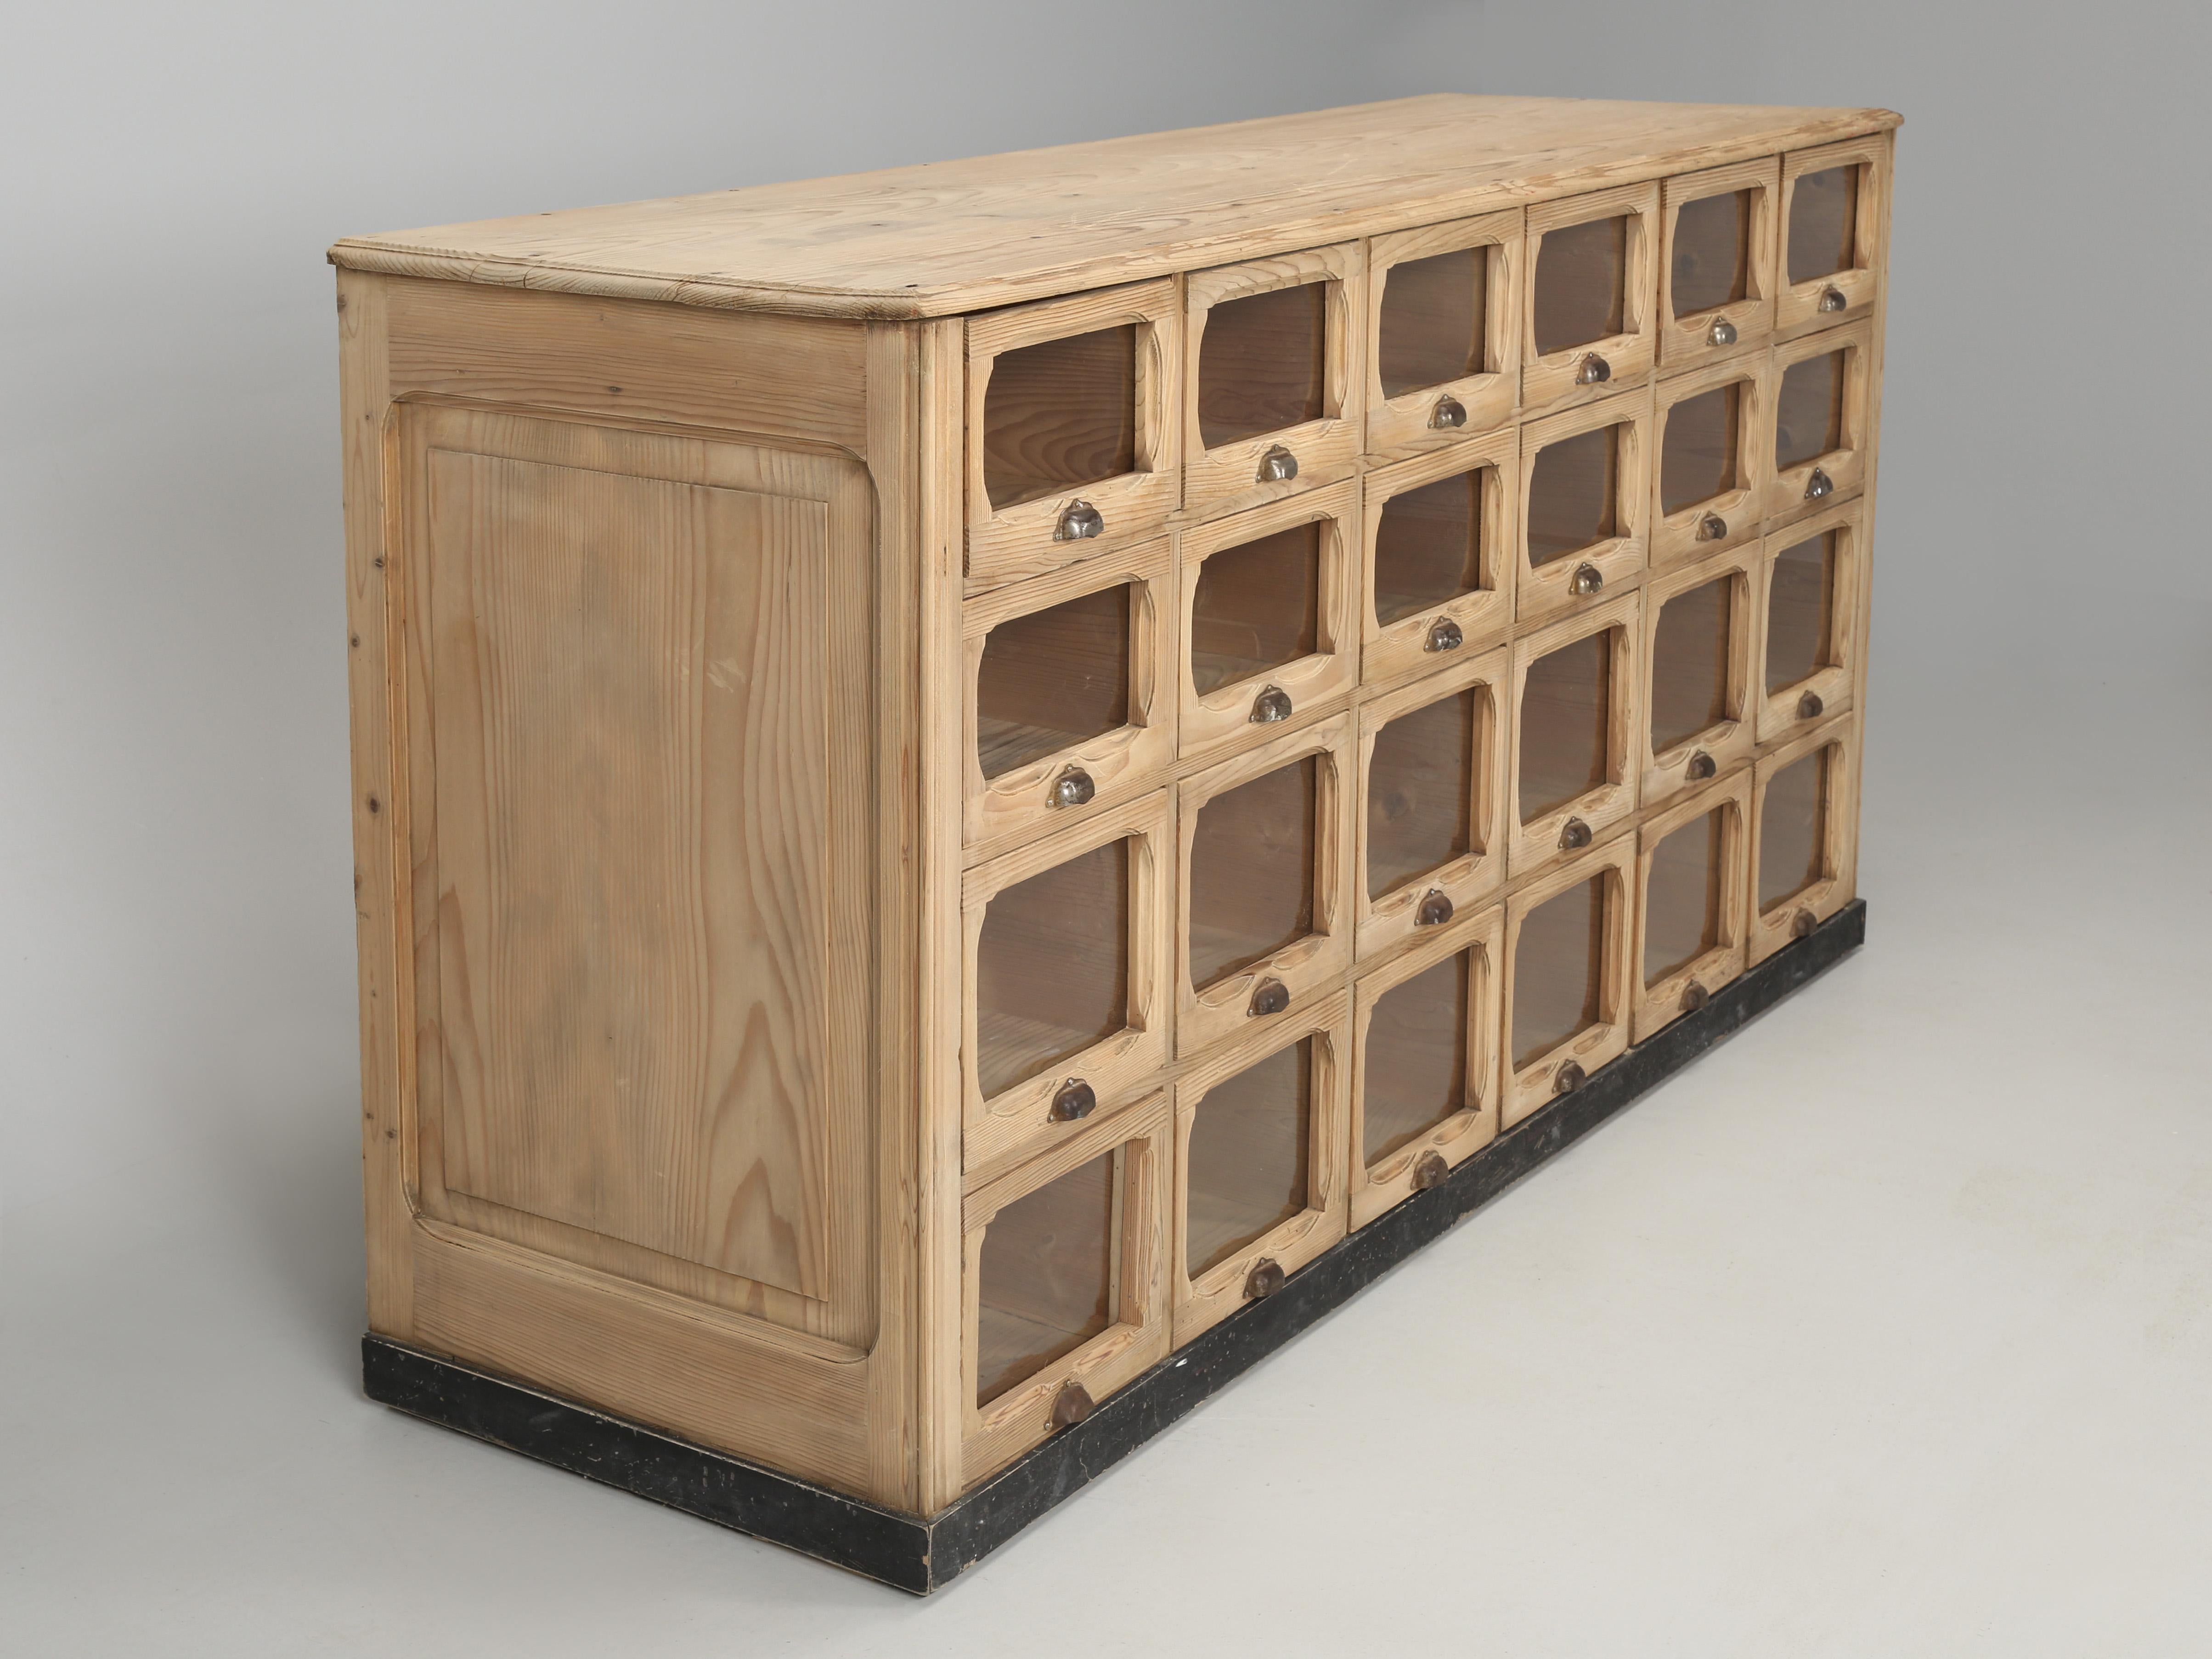 Antique American pine apothecary cabinet, or as the English would call it, a shop fitting. There are others who might describe it as a seed cabinet, regardless, to find a large multi-drawer cabinet not beat up from a commercial application and still